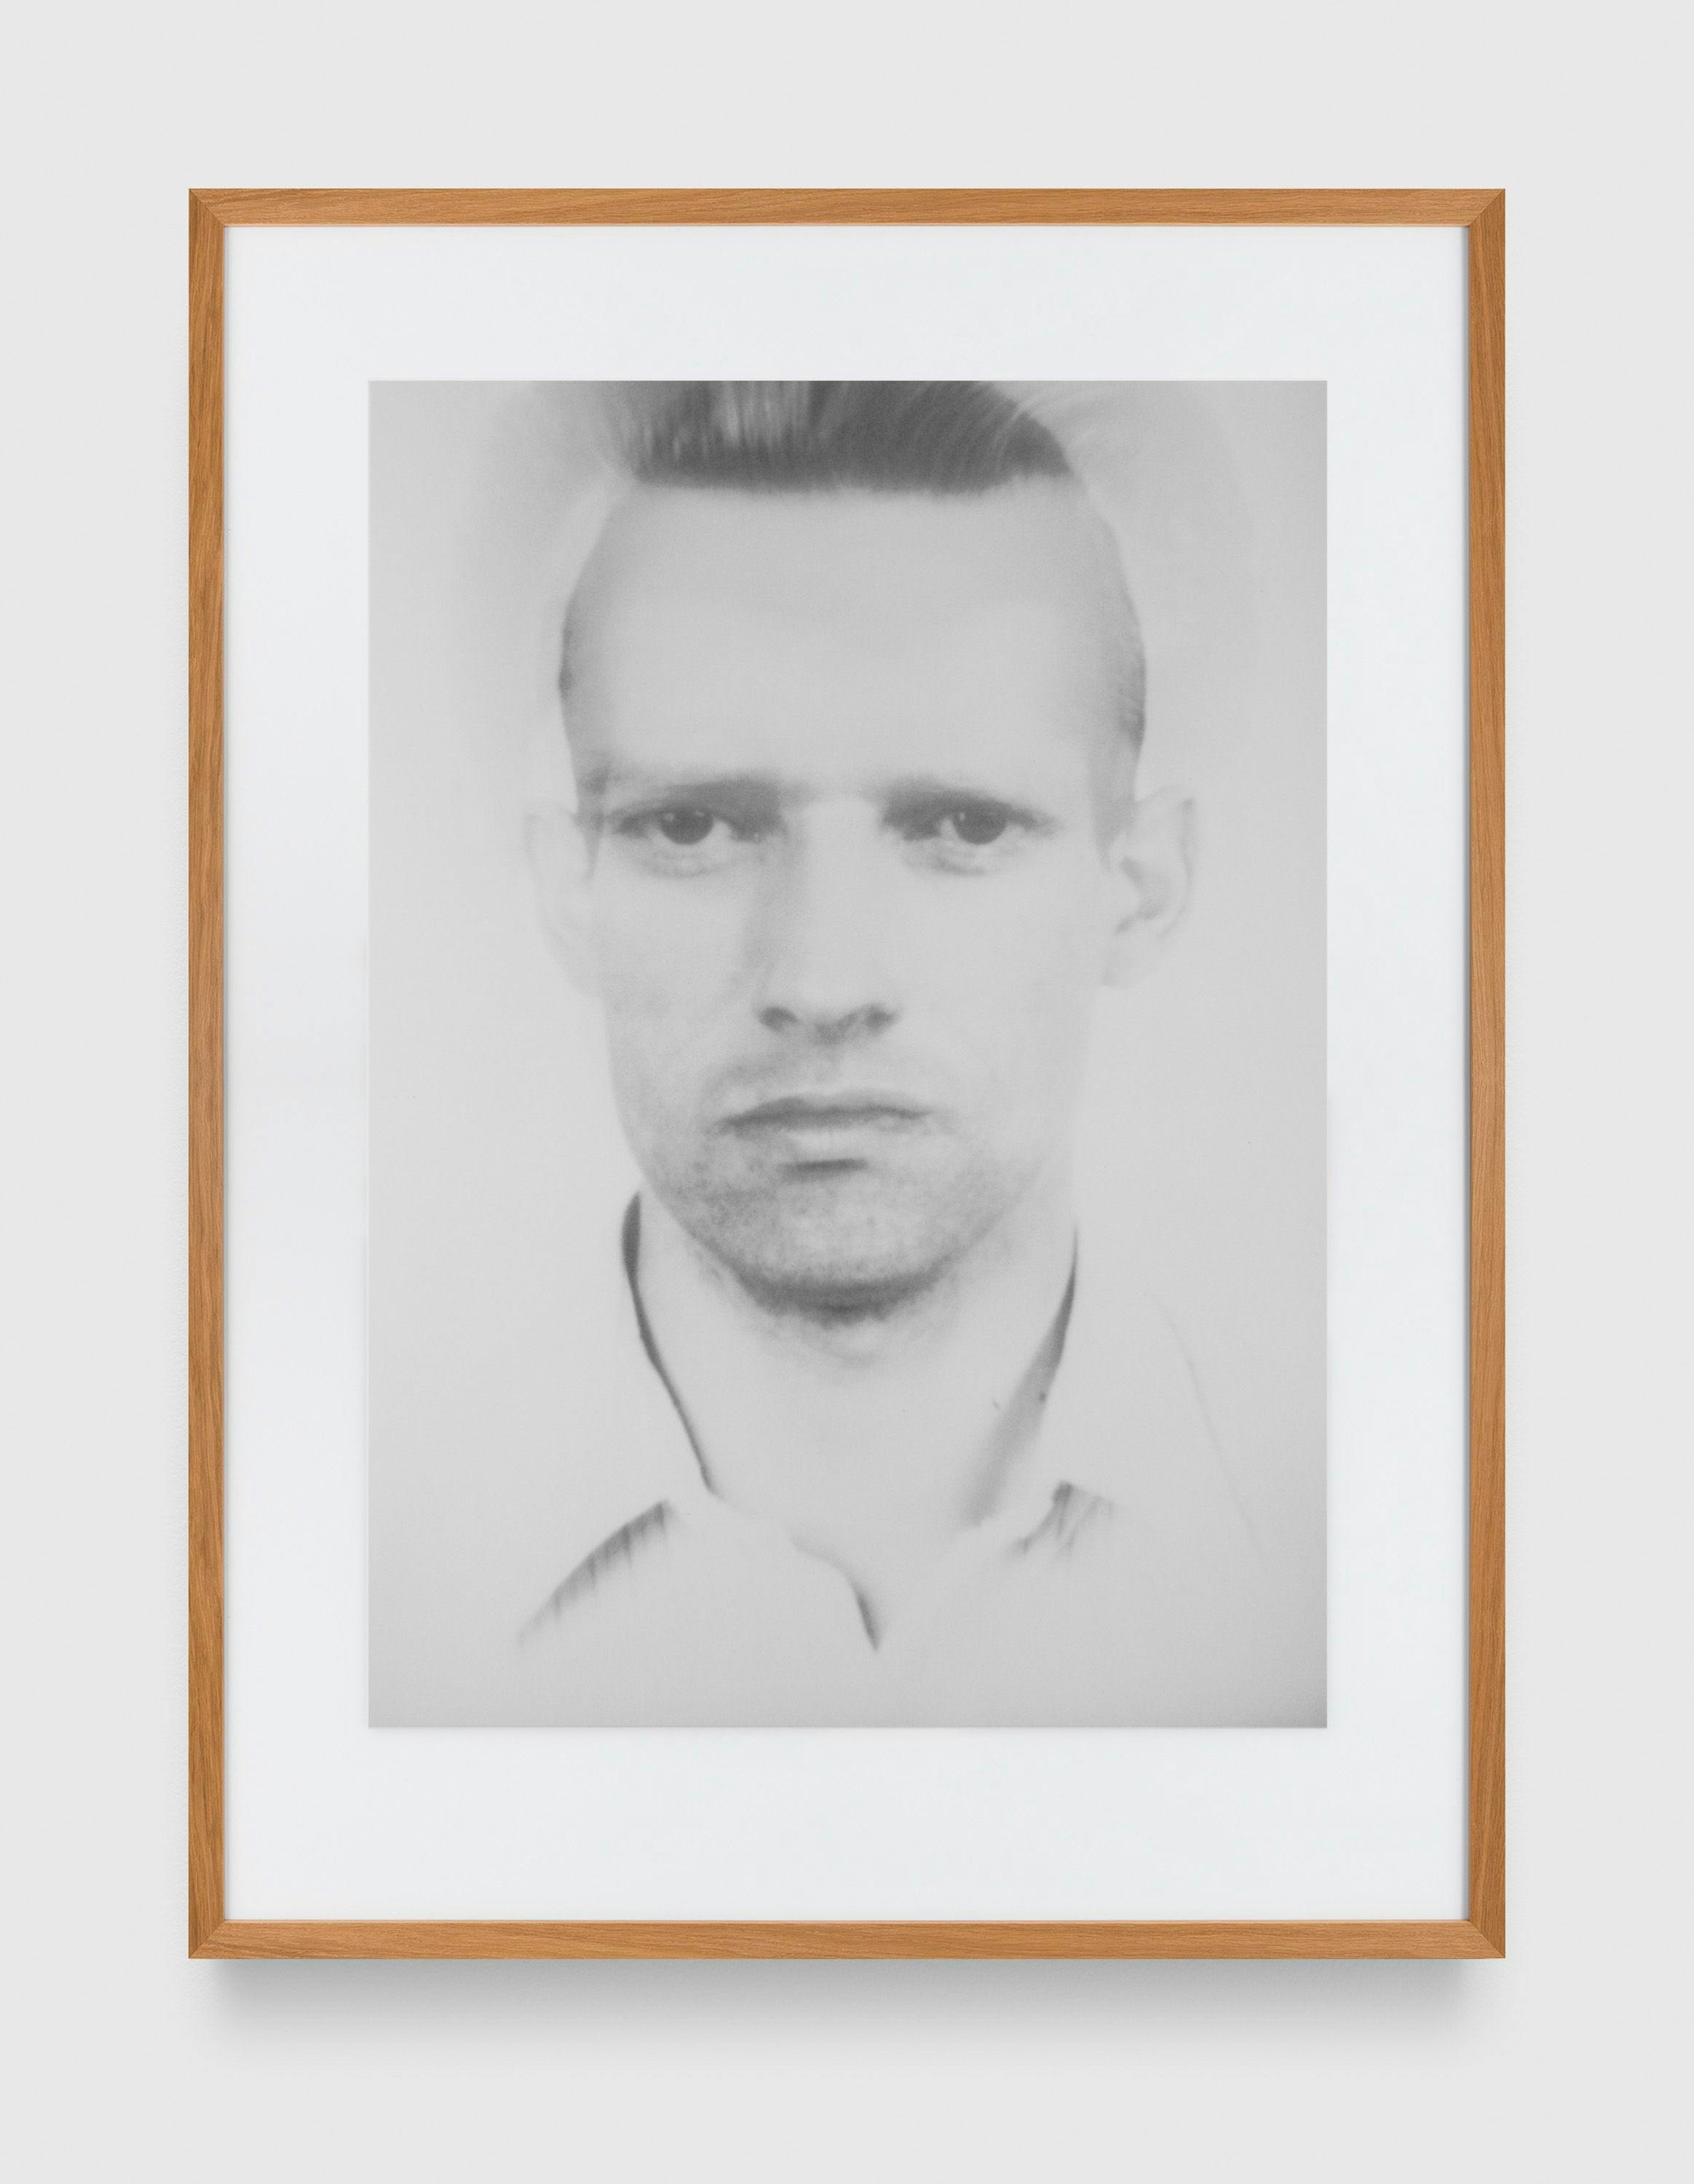 A print by Thomas Ruff, titled anderes Porträt Nr. 101/6, 1994 to 1995.